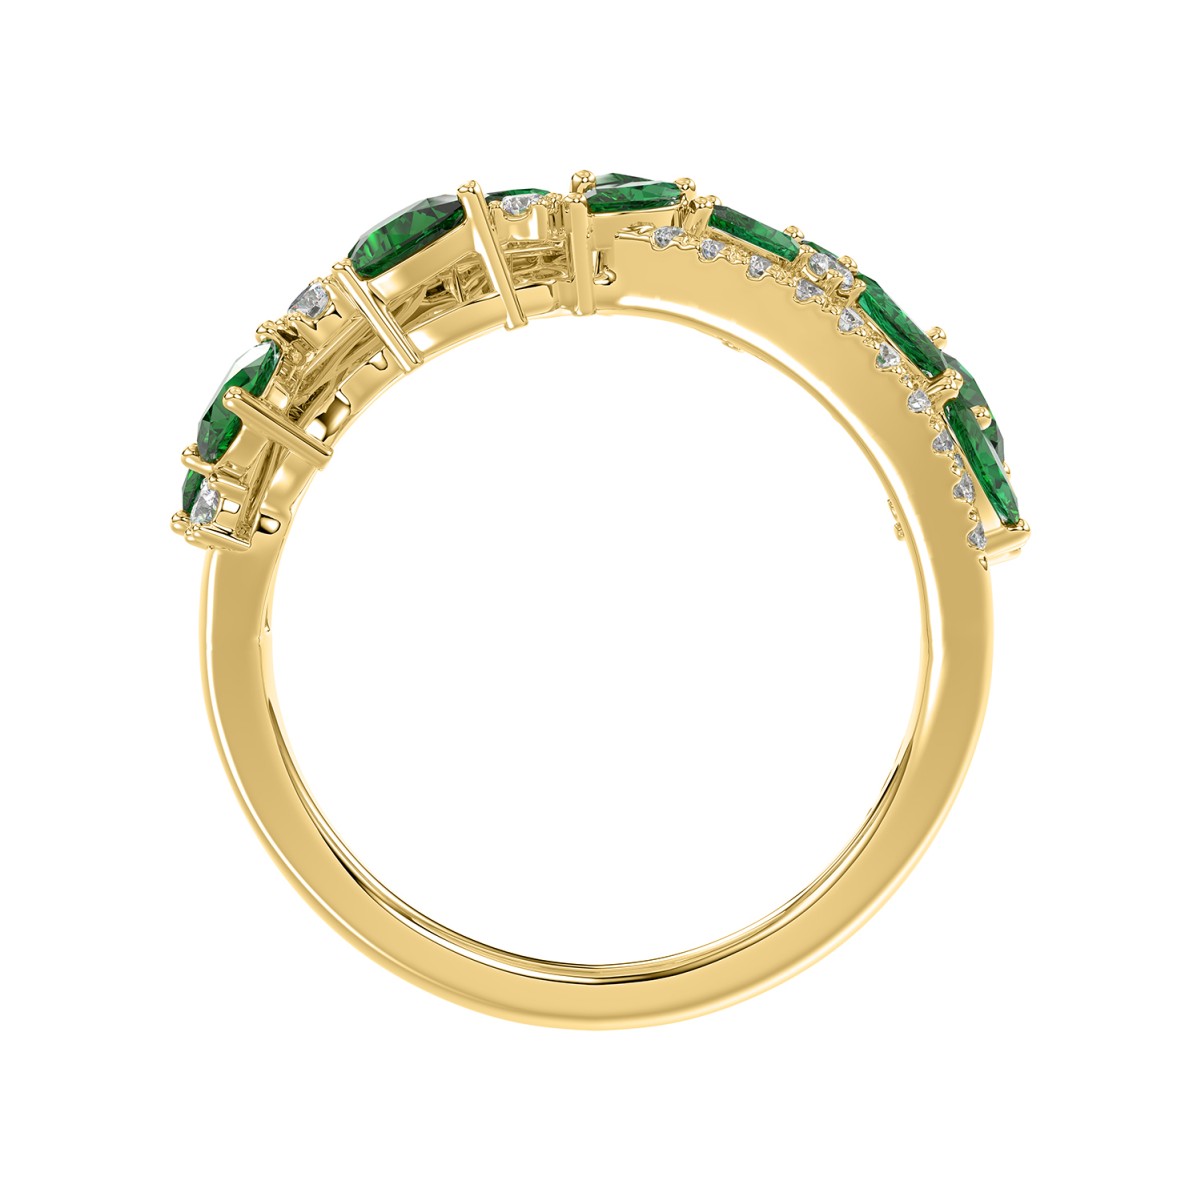 14K YELLOW GOLD 1/3CT ROUND/MARQUISE/PEAR DIAMOND LADIES FASHION RING( COLOR STONE MARQUISE GREEN EMERALD DIAMOND/PEAR 1.45CT/ 12 STONE)